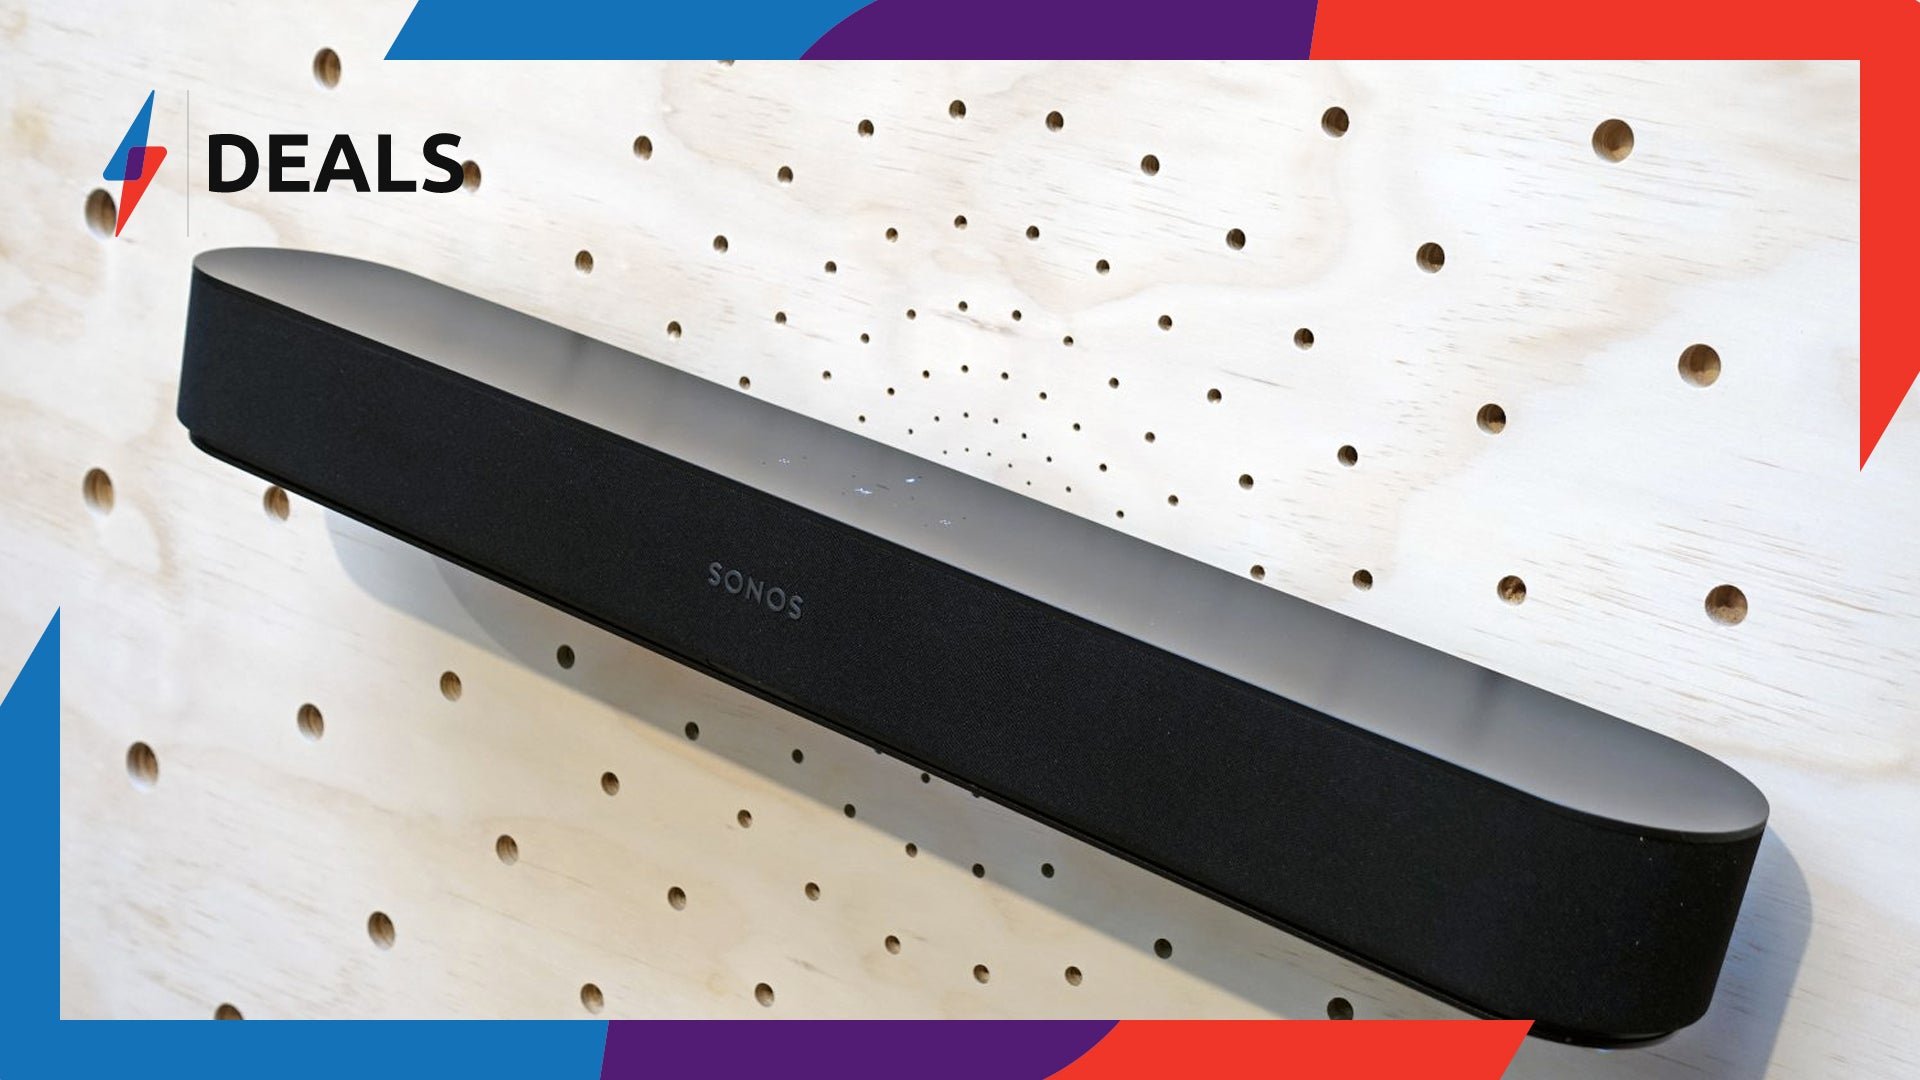 The Sonos Beam is now cheaper than its Amazon Black Friday price